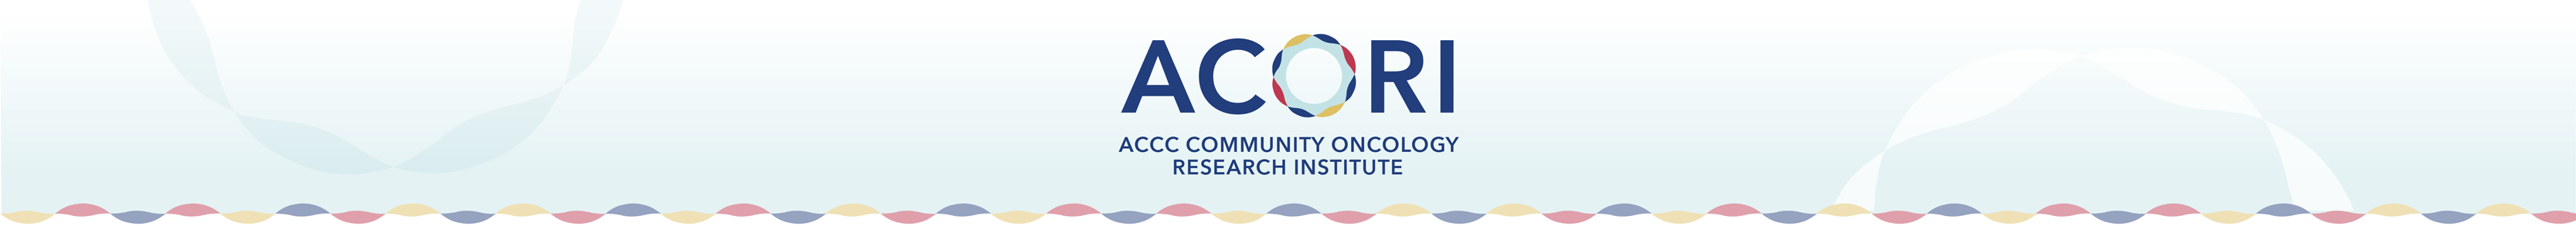 ACORI: ACCC Community Oncology Research Institute 